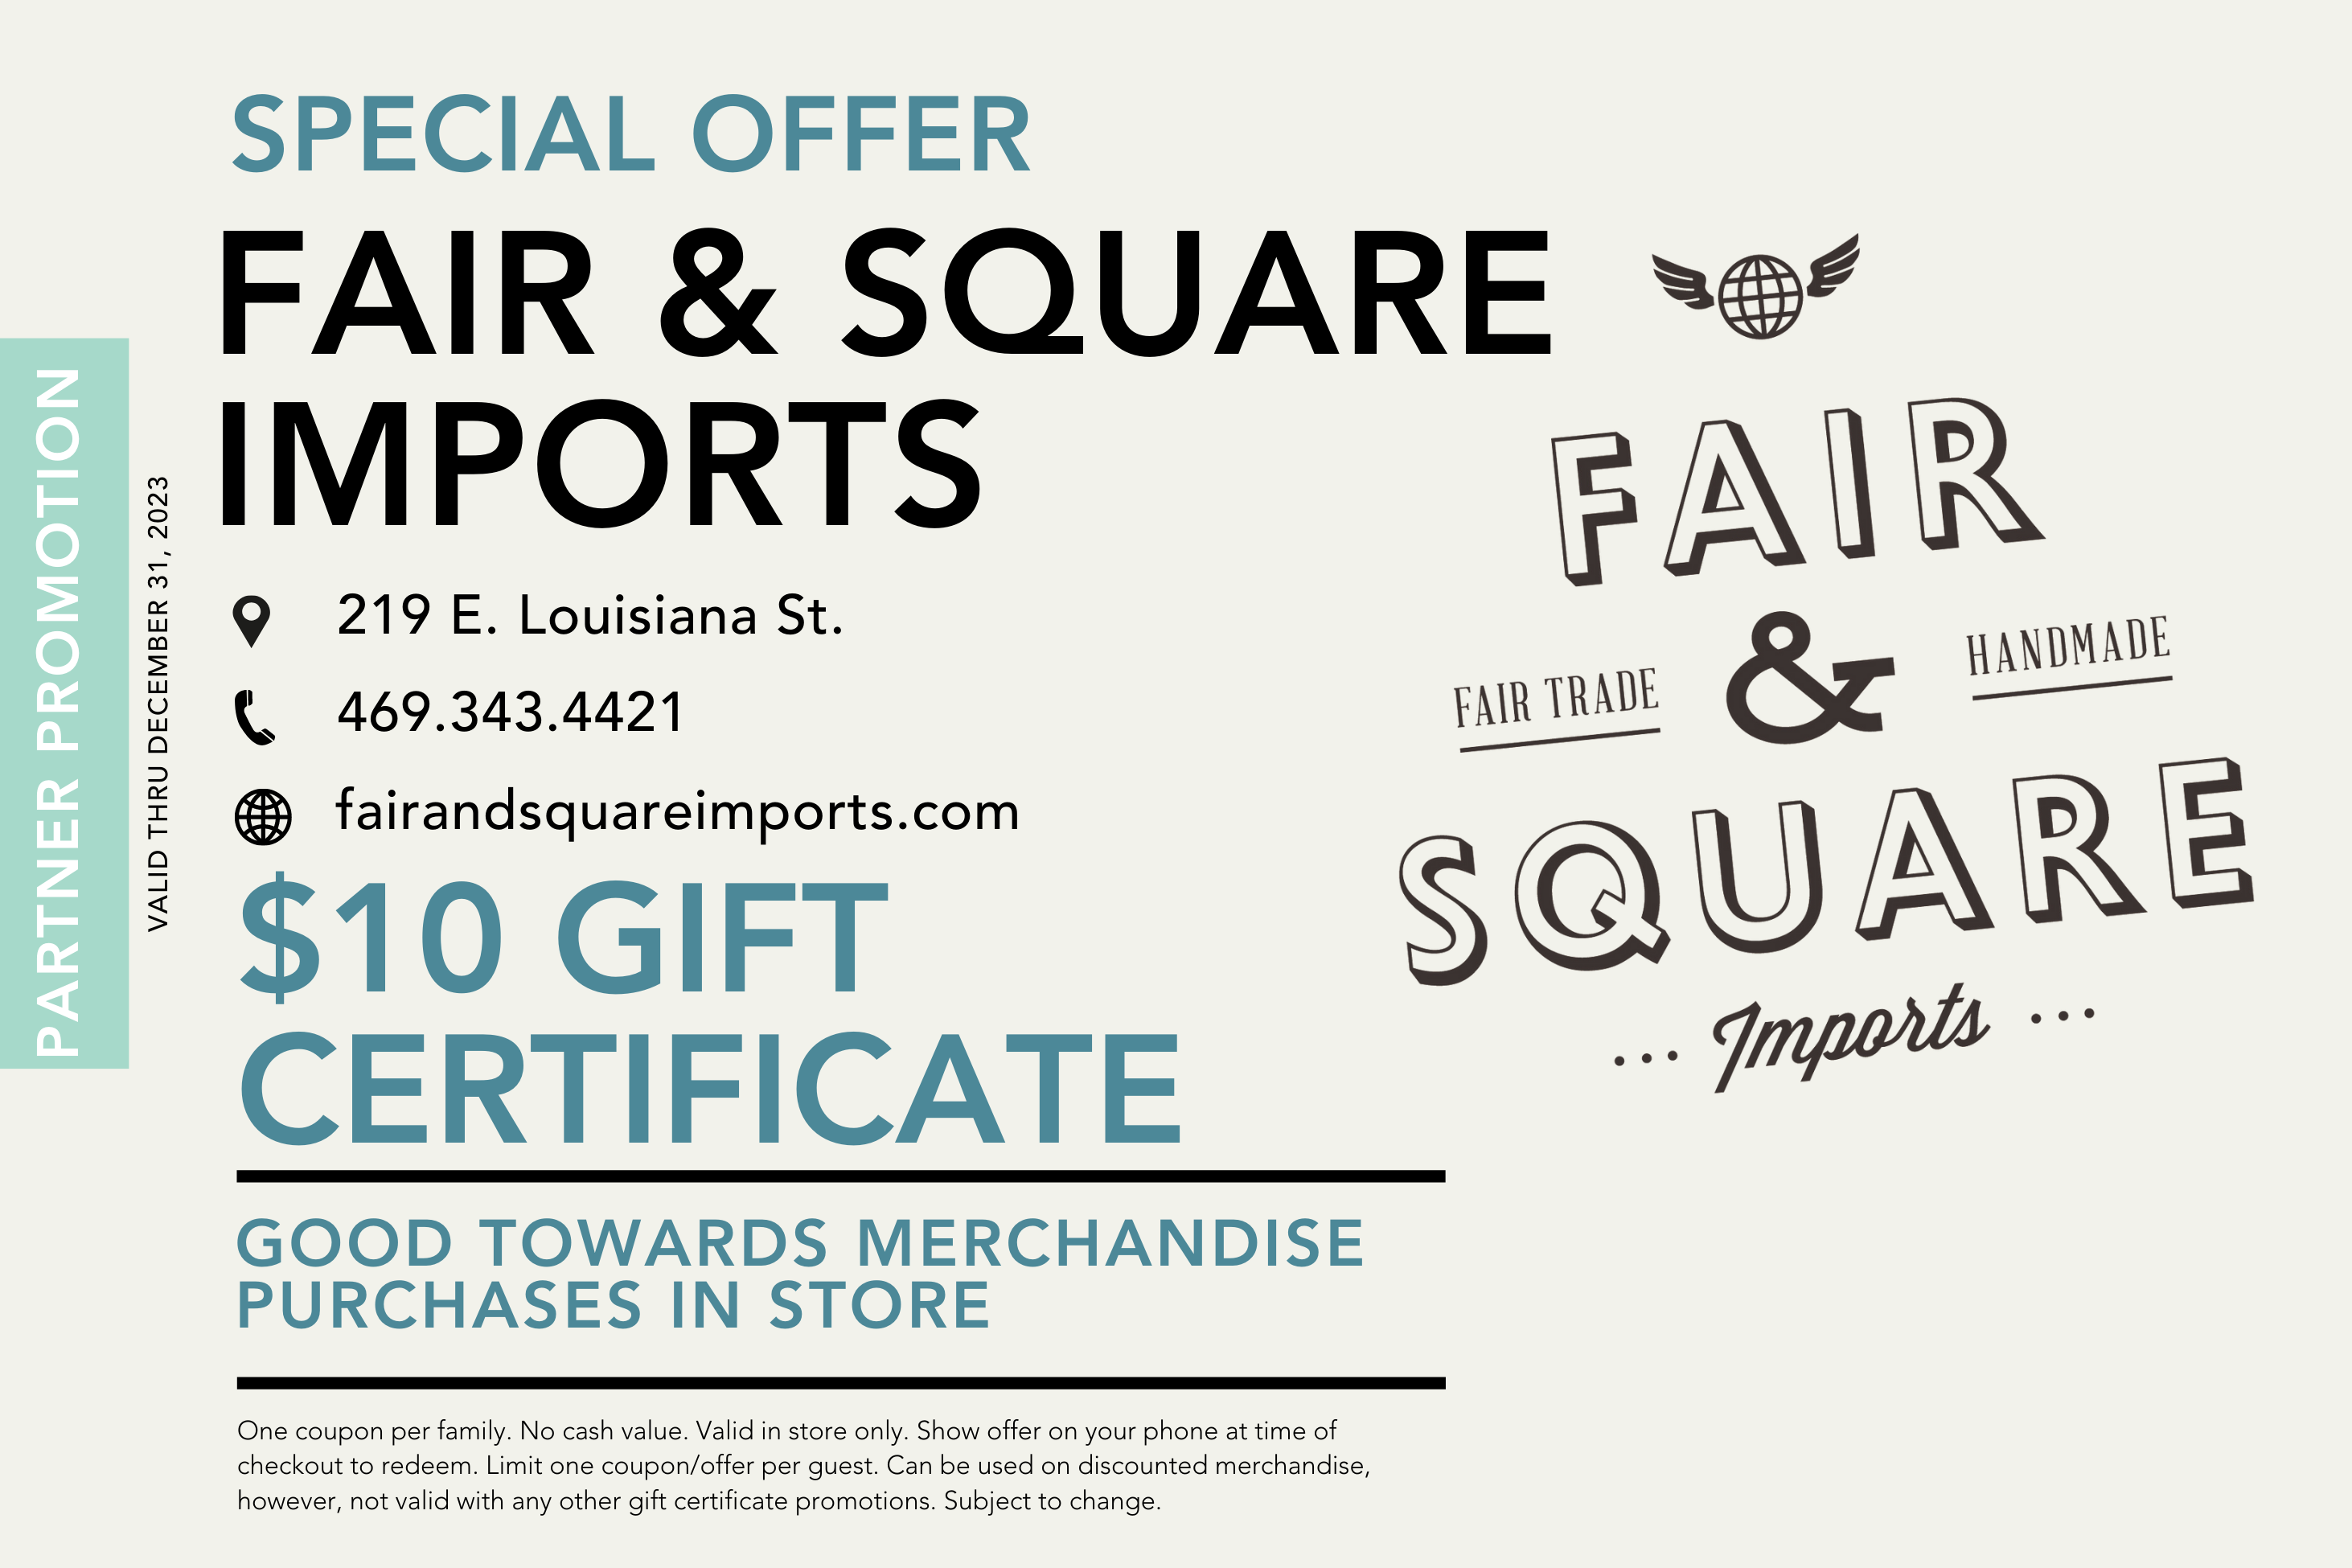 Fair & Square Imports - $5 Gift Certificate